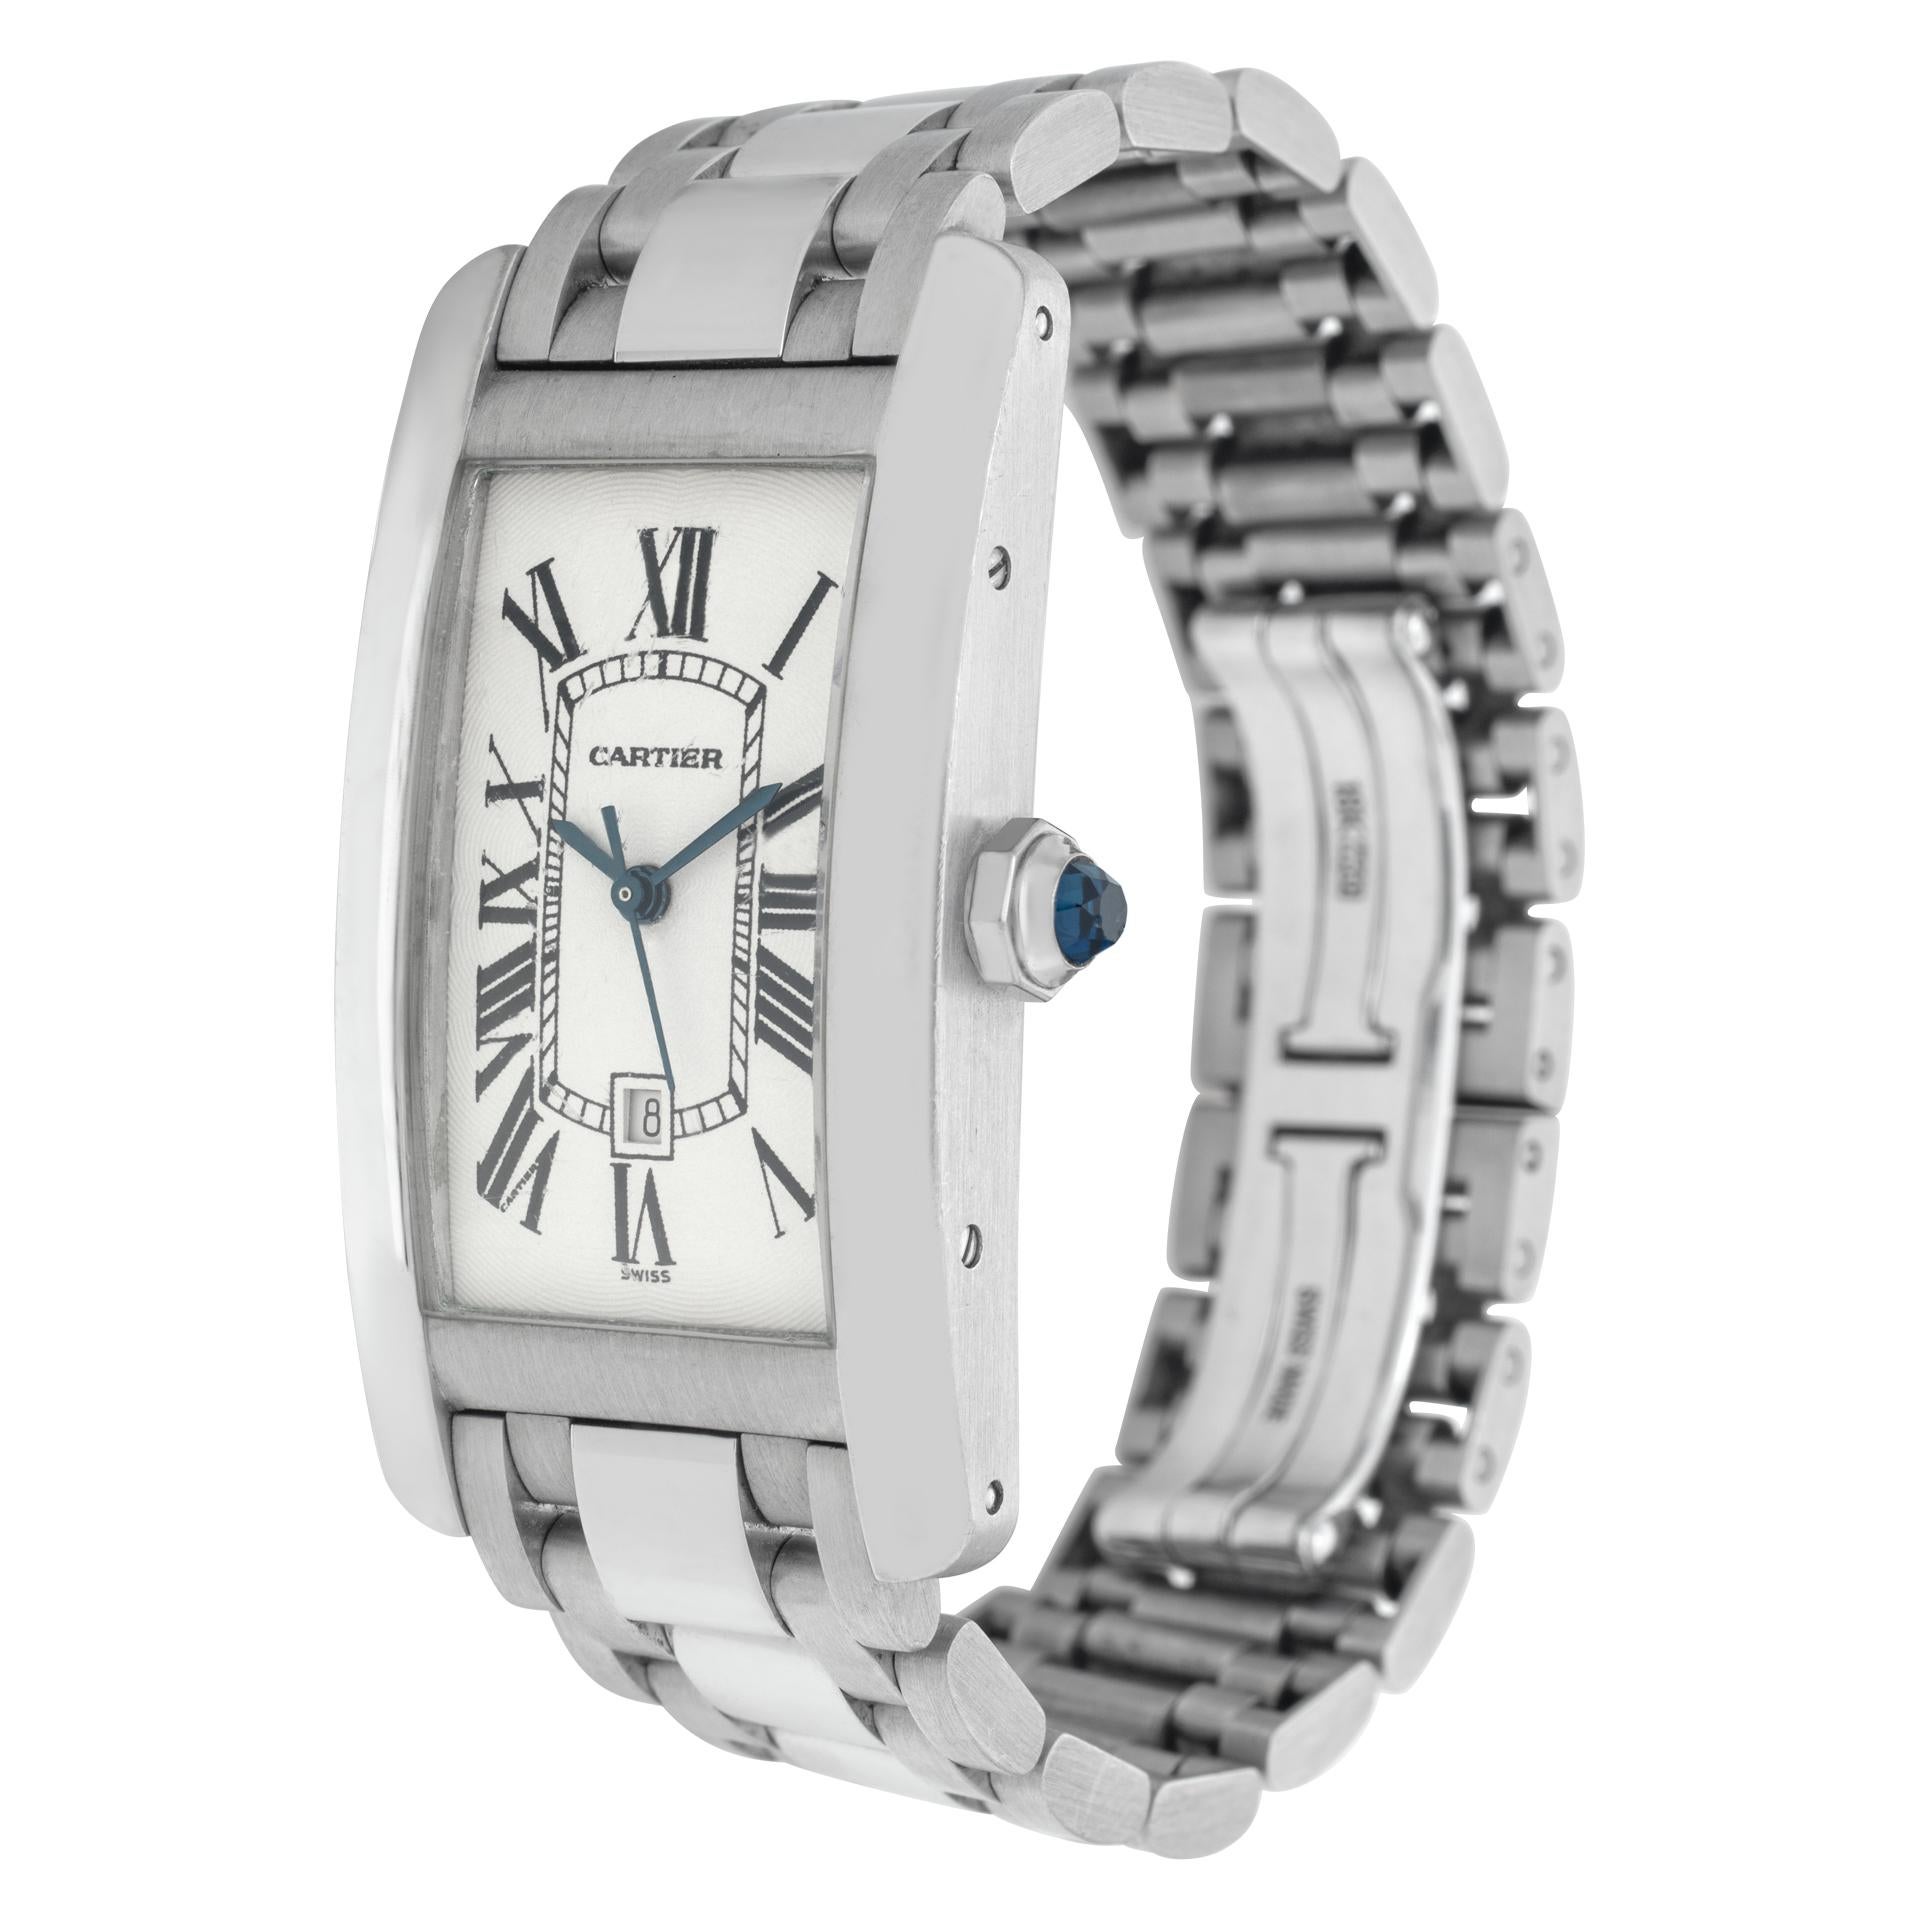 Cartier Tank Americaine in 18k white gold. Auto w/ sweep seconds and date. 41.5 mm length (lug to lug) x 23 mm width case size. Ref W26036L1. Circa 2000s. Fine Pre-owned Cartier Watch. Certified preowned Dress Cartier Tank Americaine W26036L1 watch